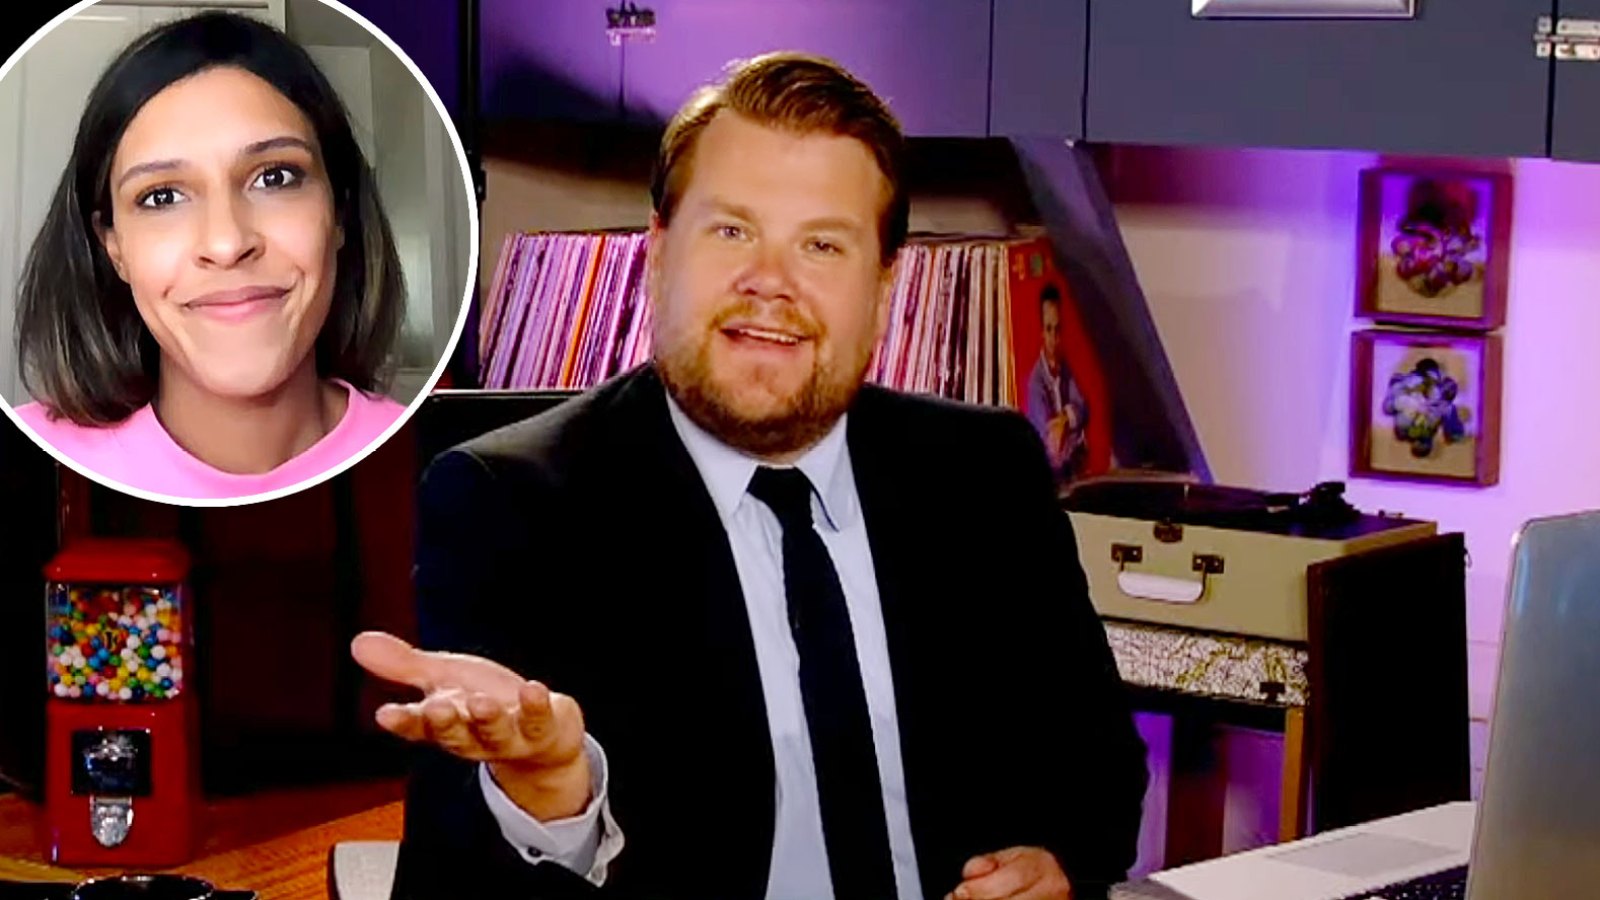 James Corden Late Late Show Staffer Gives Him a Lesson in White Privilege